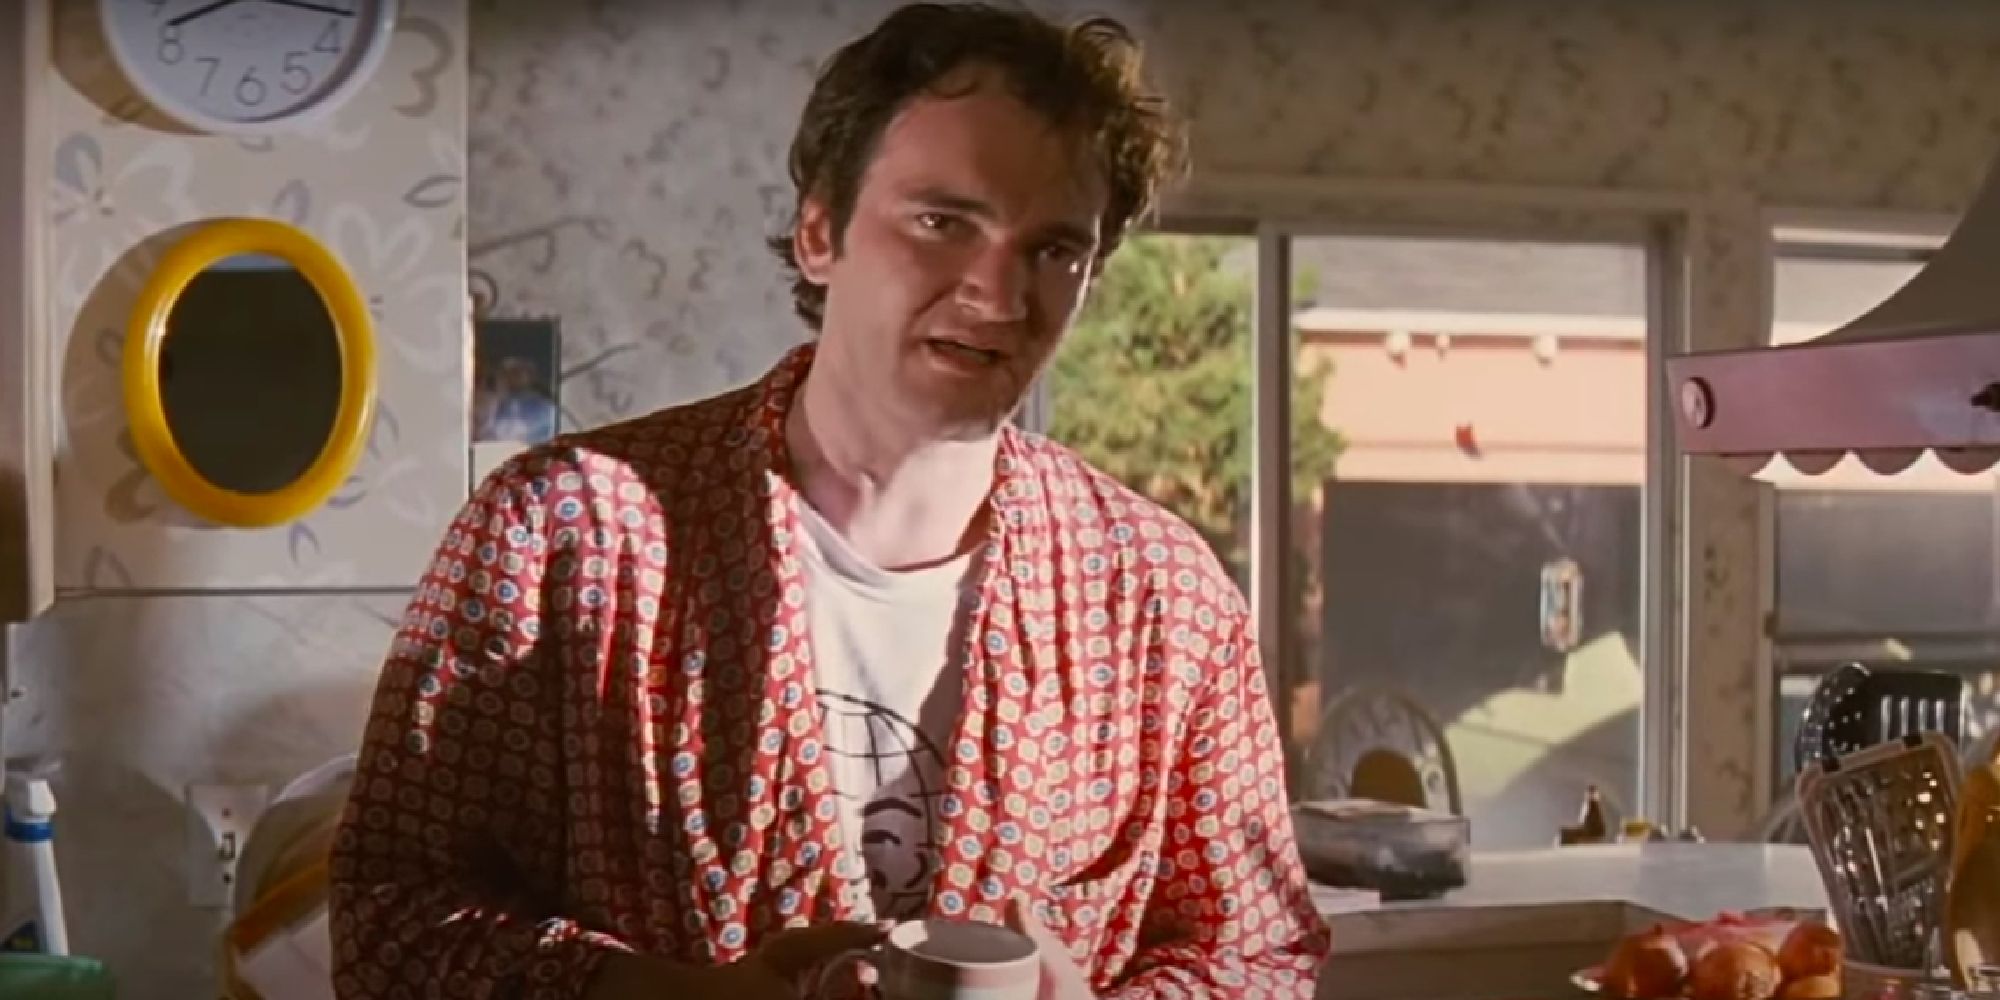 Quentin Tarantino as Jimmy, holding a mug in Pulp Fiction